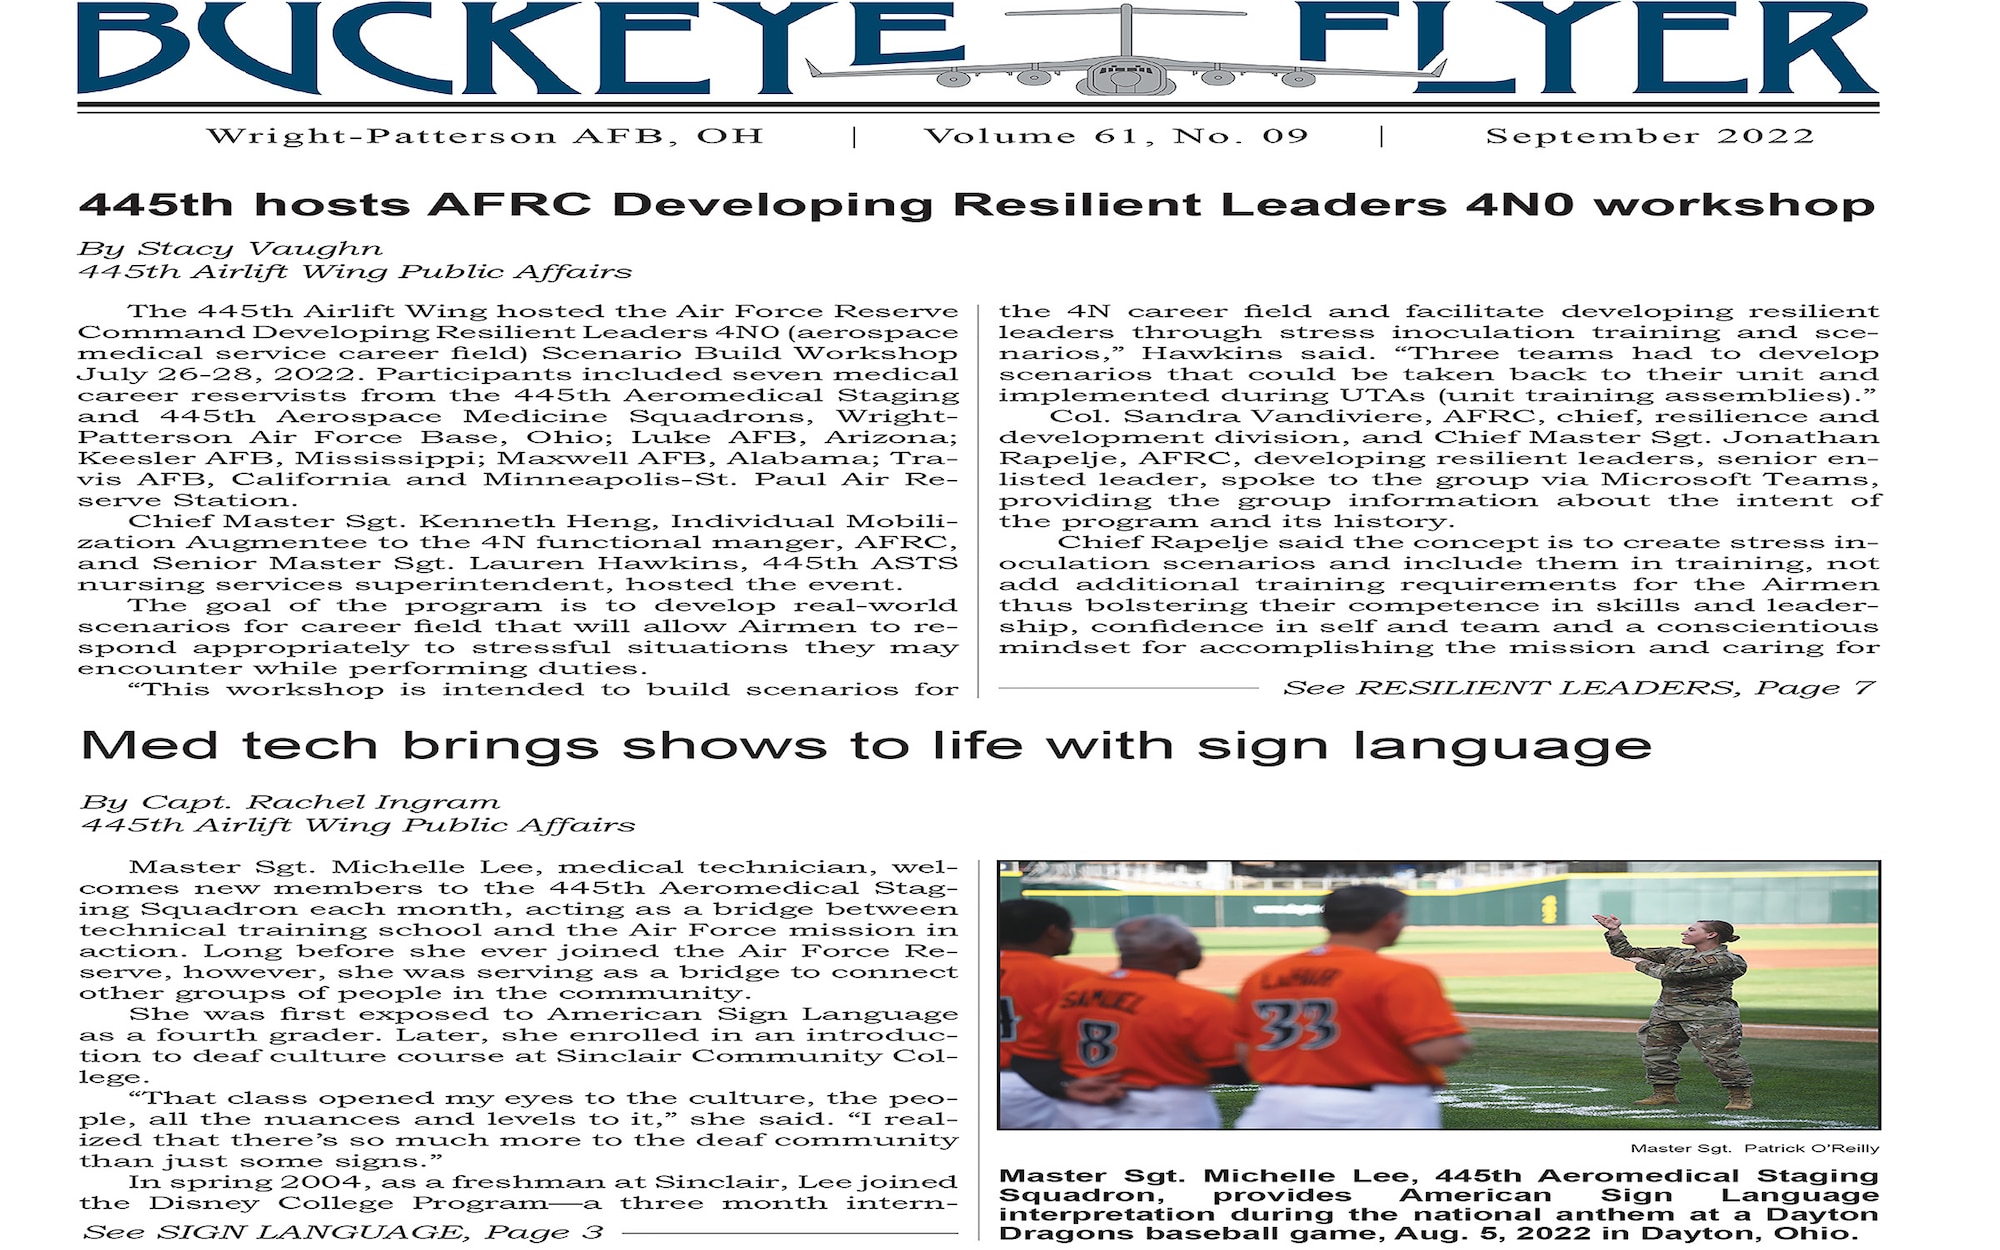 The September 2022 issue of the Buckeye Flyer is now available. The official publication of the 445th Airlift Wing includes eight pages of stories, photos and features pertaining to the 445th Airlift Wing, Air Force Reserve Command and the U.S. Air Force.